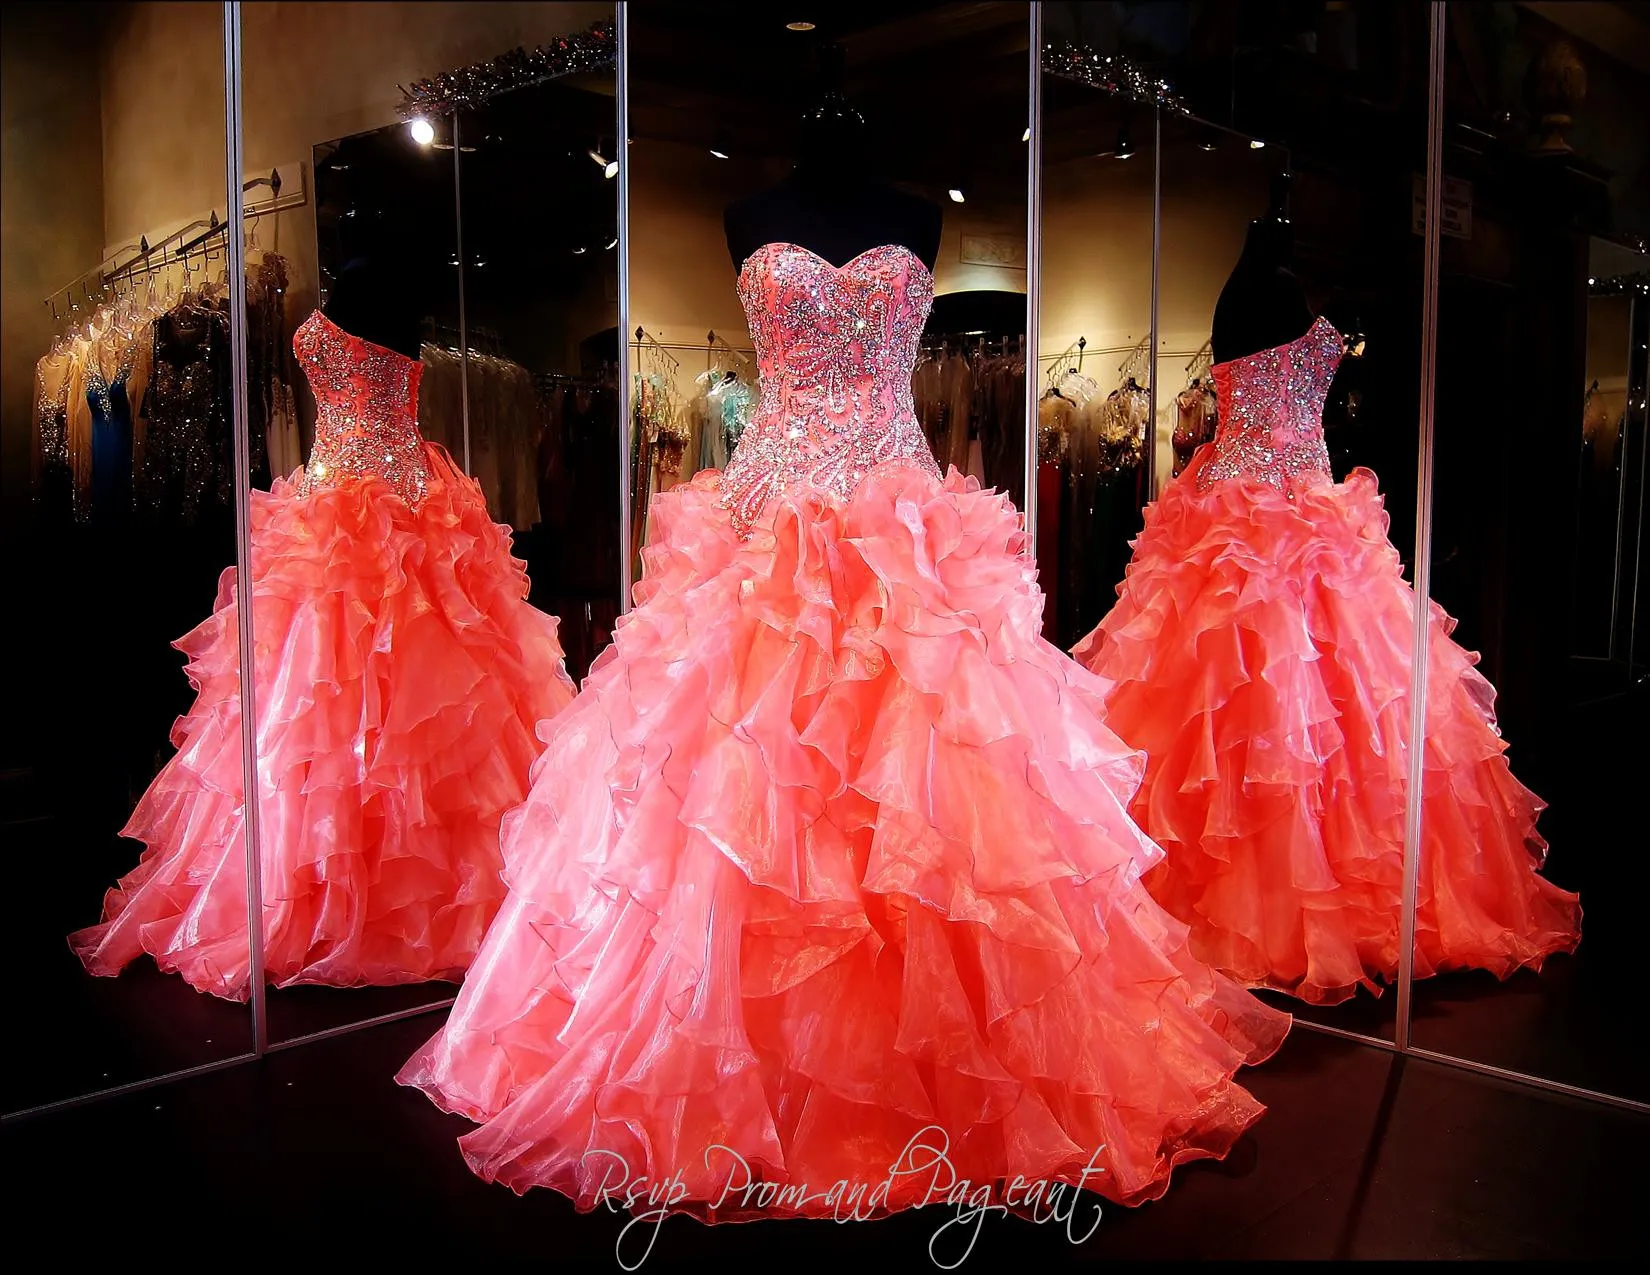 Coral Ball Gown Strapless Beaded Sweetheart Bodice Lace up Back Full Ruffled Shirt Quinceanera Dress Crystals Pageant Dresses